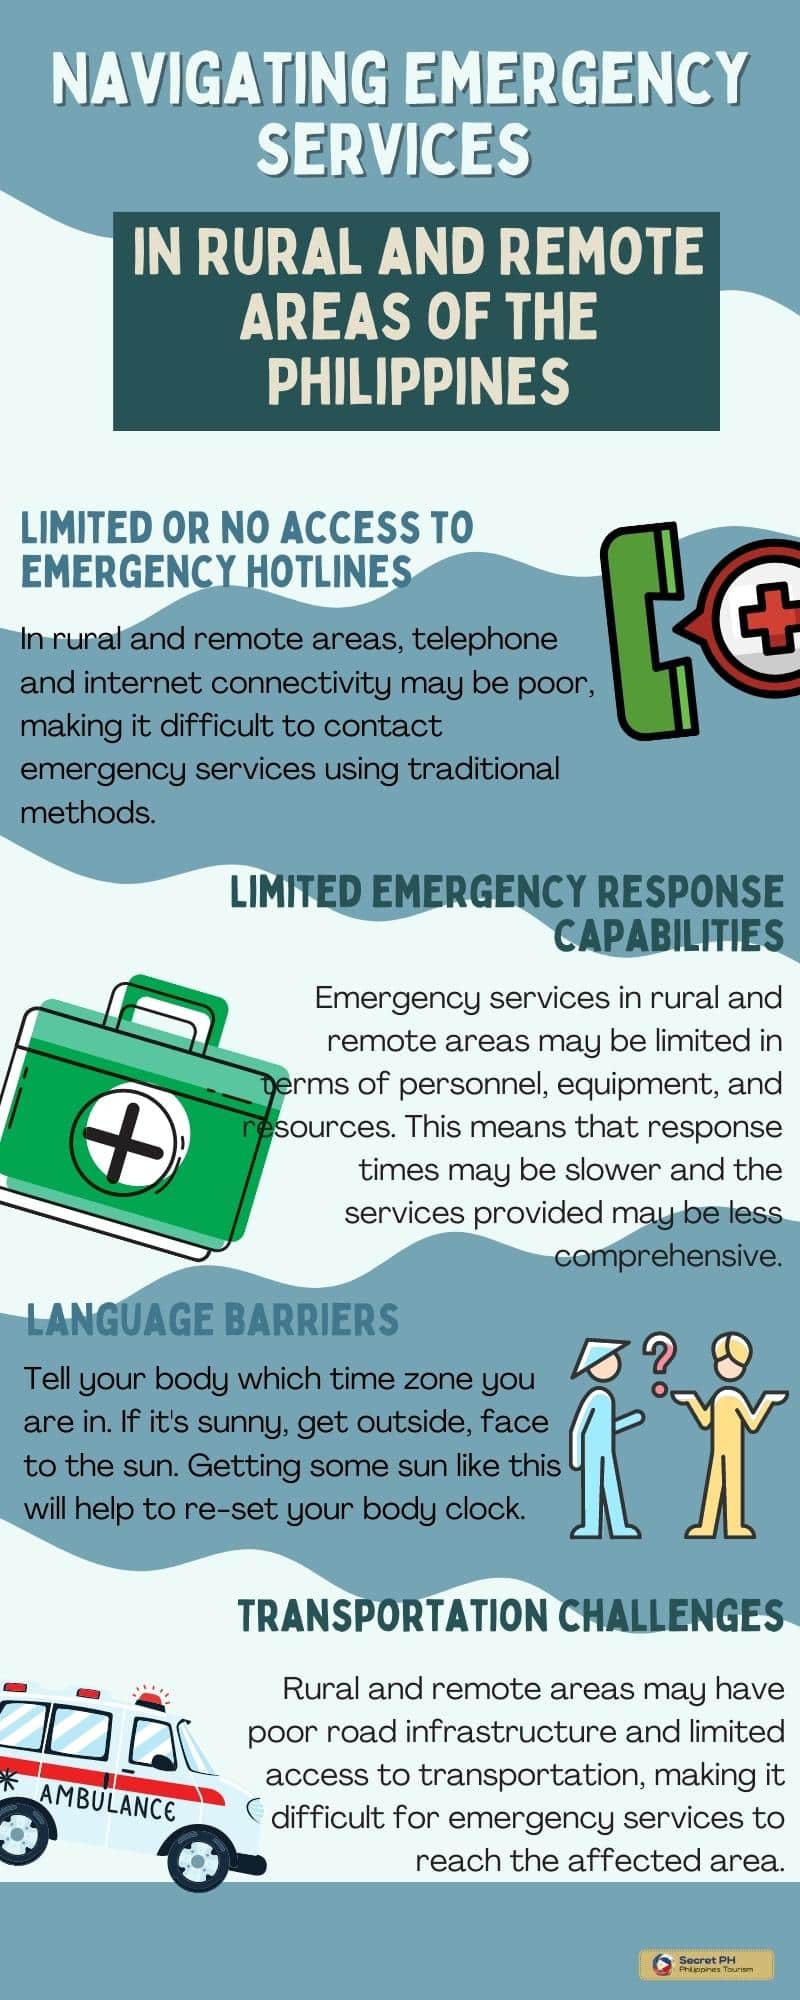 Navigating Emergency Services in Rural and Remote Areas of the Philippines